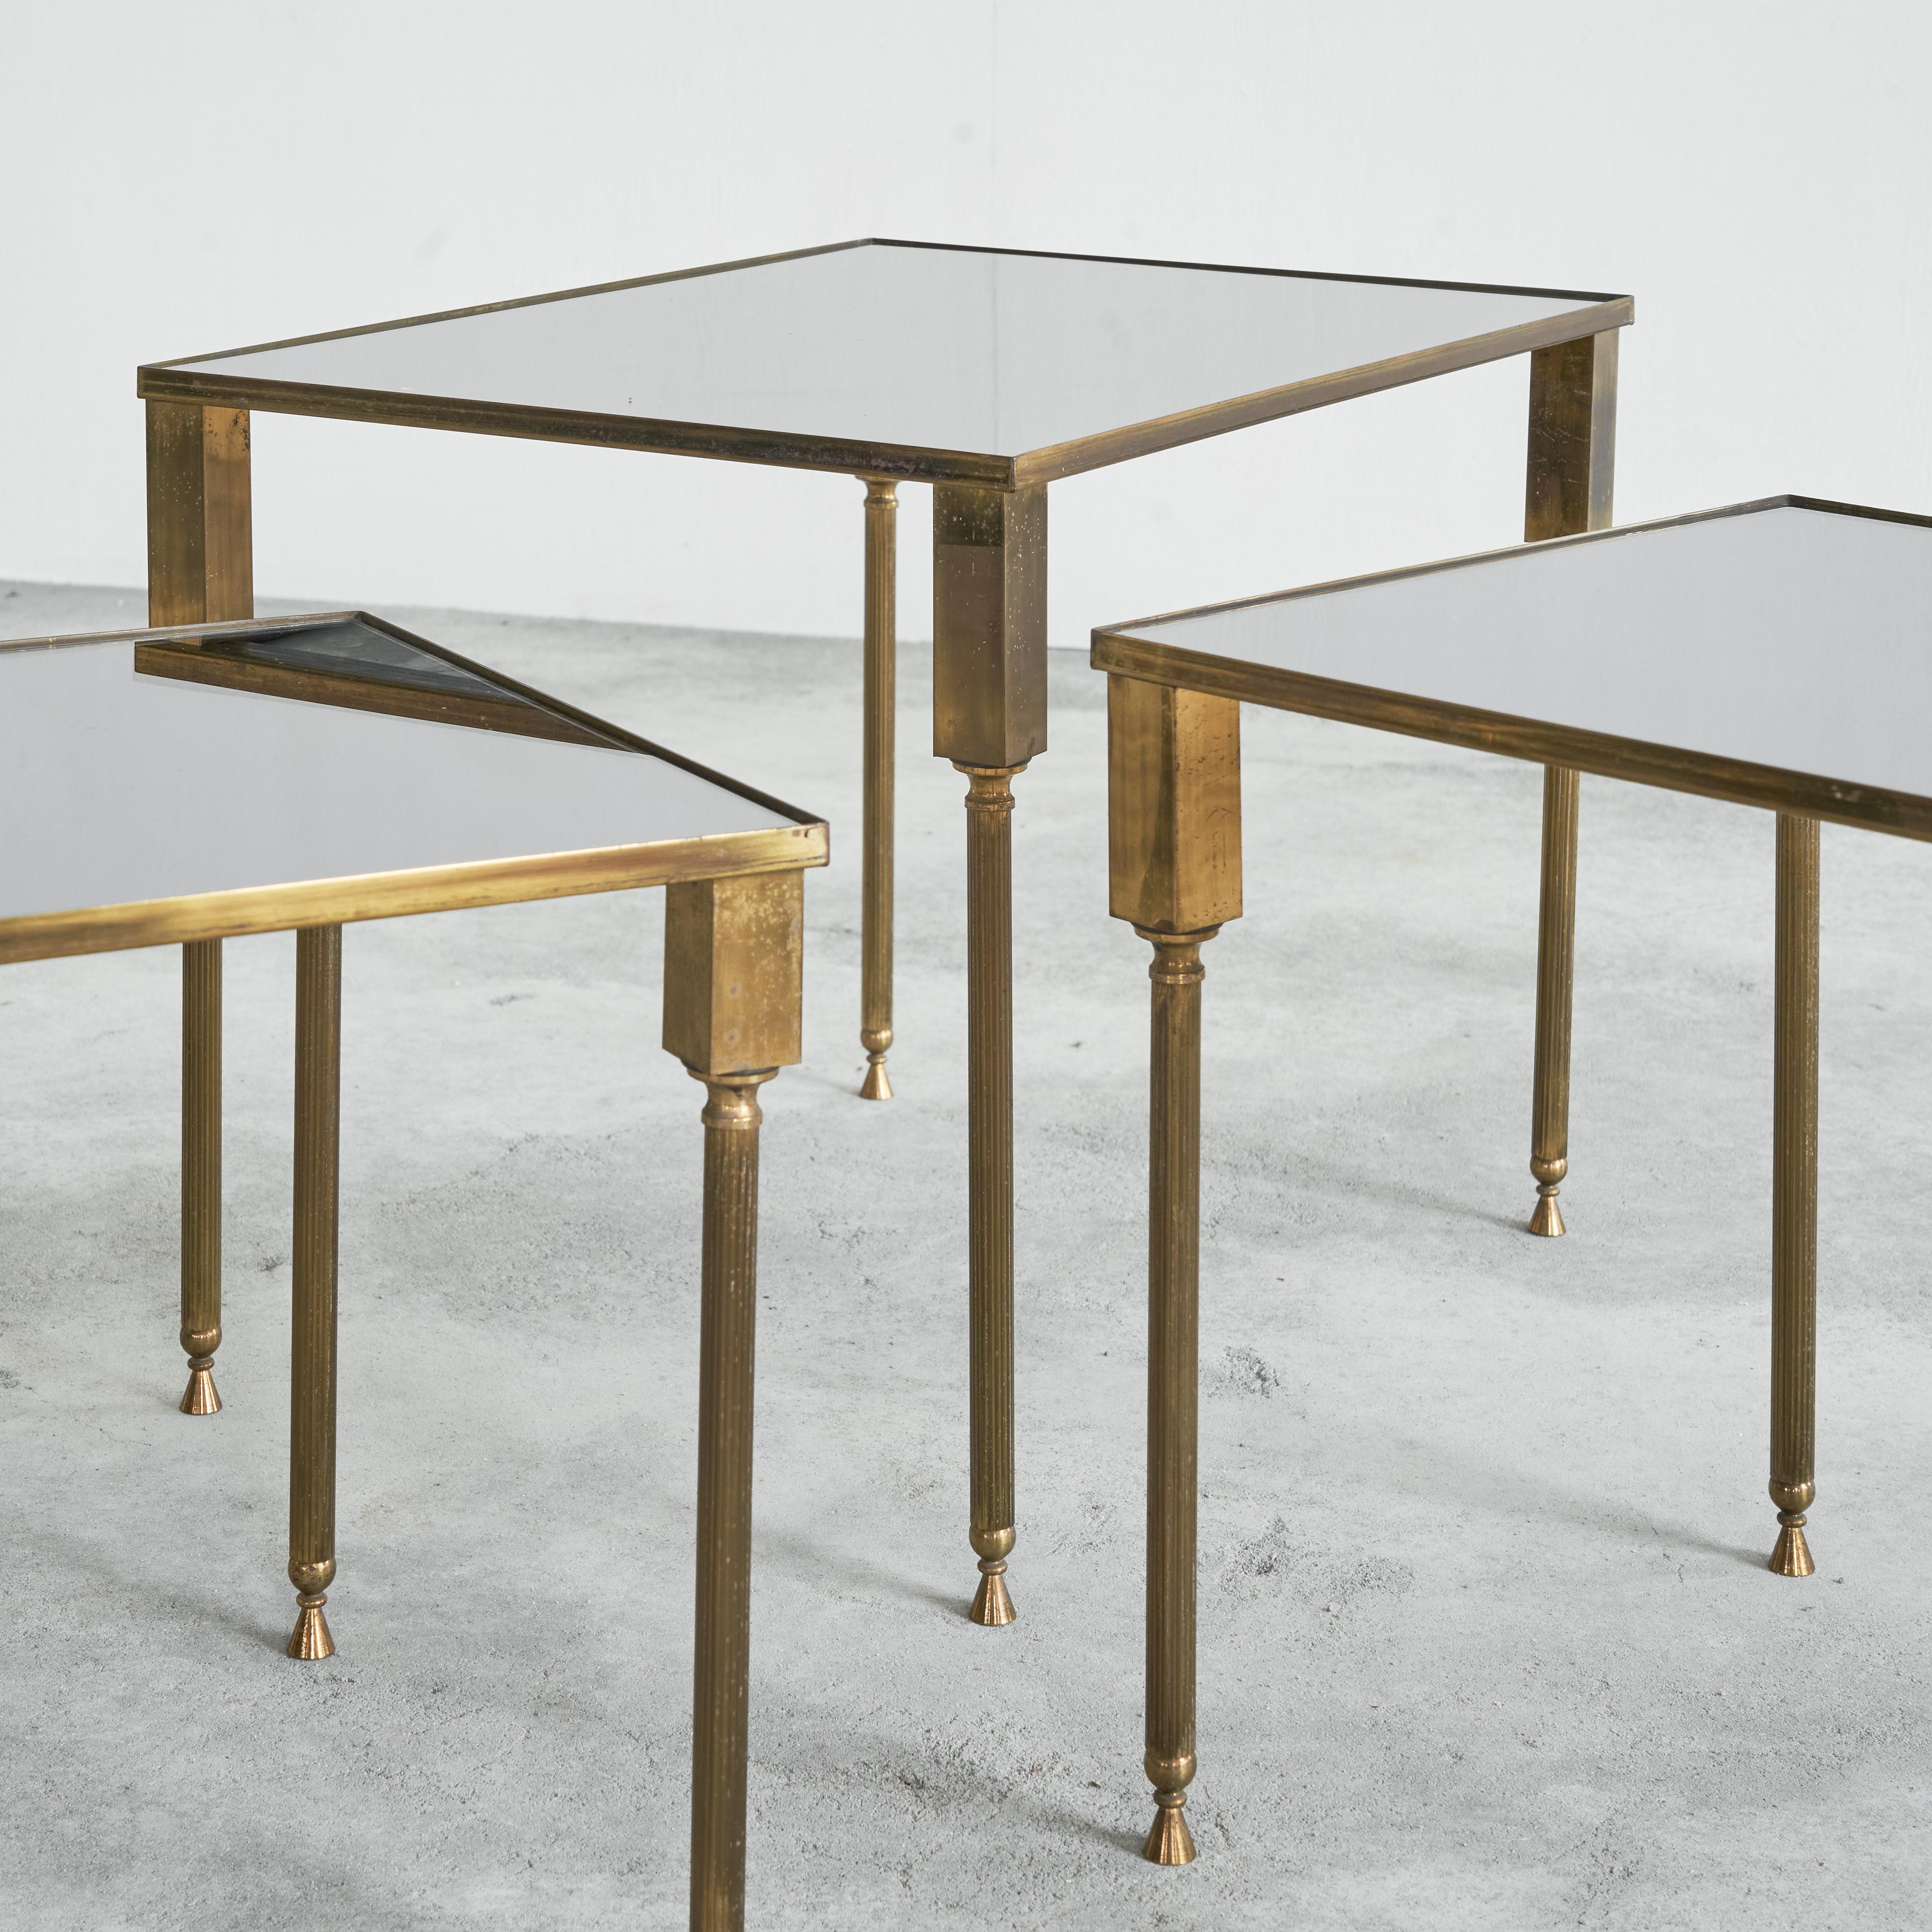 French Maison Charles Set of 3 Nesting Tables in Patinated Brass and Mirror Glass 1960s